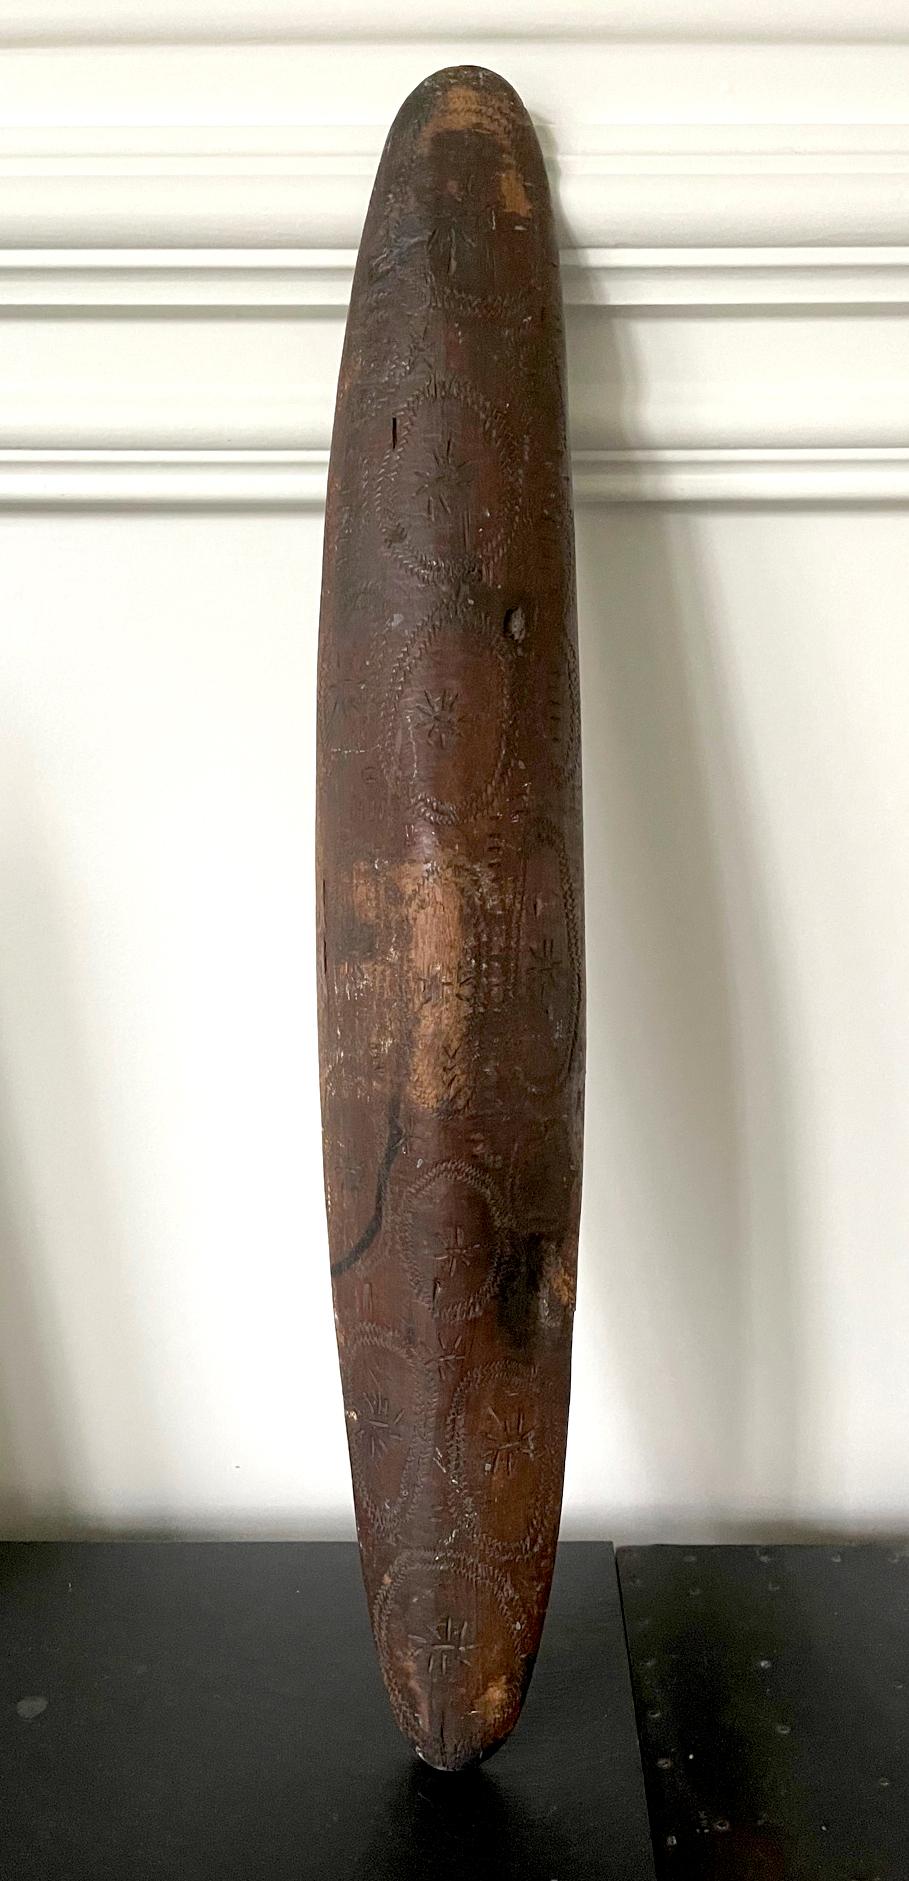 A tall and narrow parrying shield from the Aboriginal people living in the Western Australia. The piece was carved out of a single block of hard wood that is dense and heavy. Of a classic and distinguish spindle shape, a swell middle part integrates